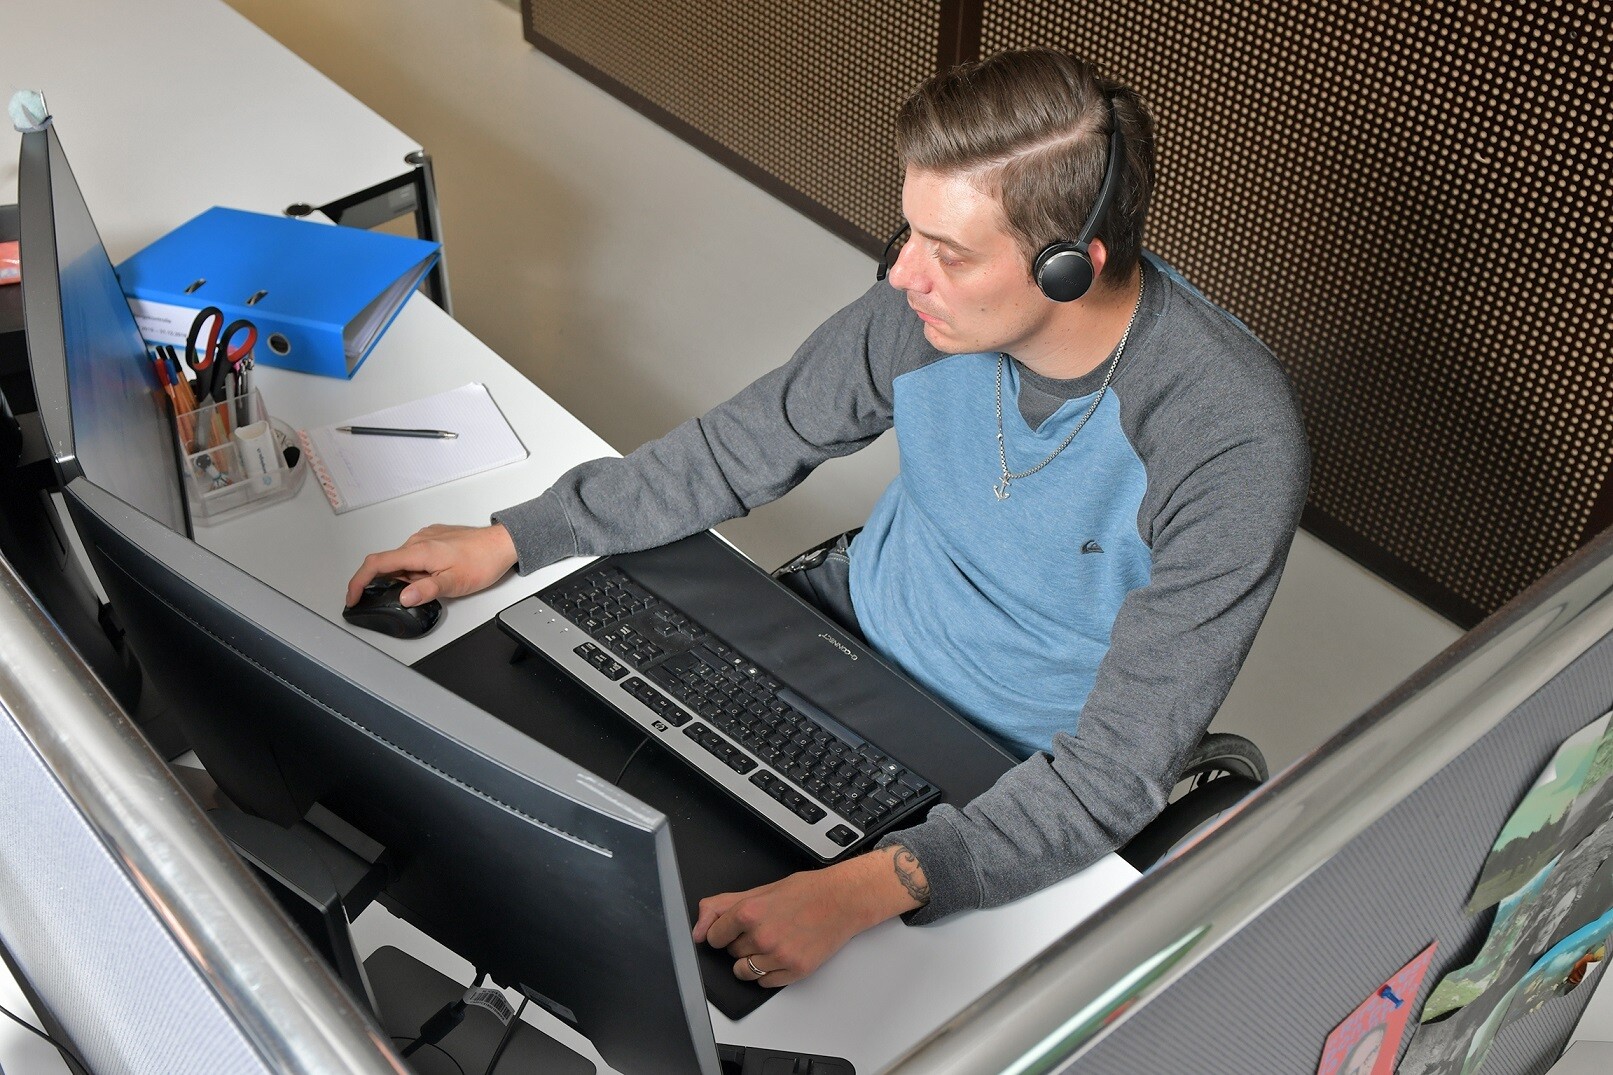 Florian Bickel sits in front of the computer at his workstation.